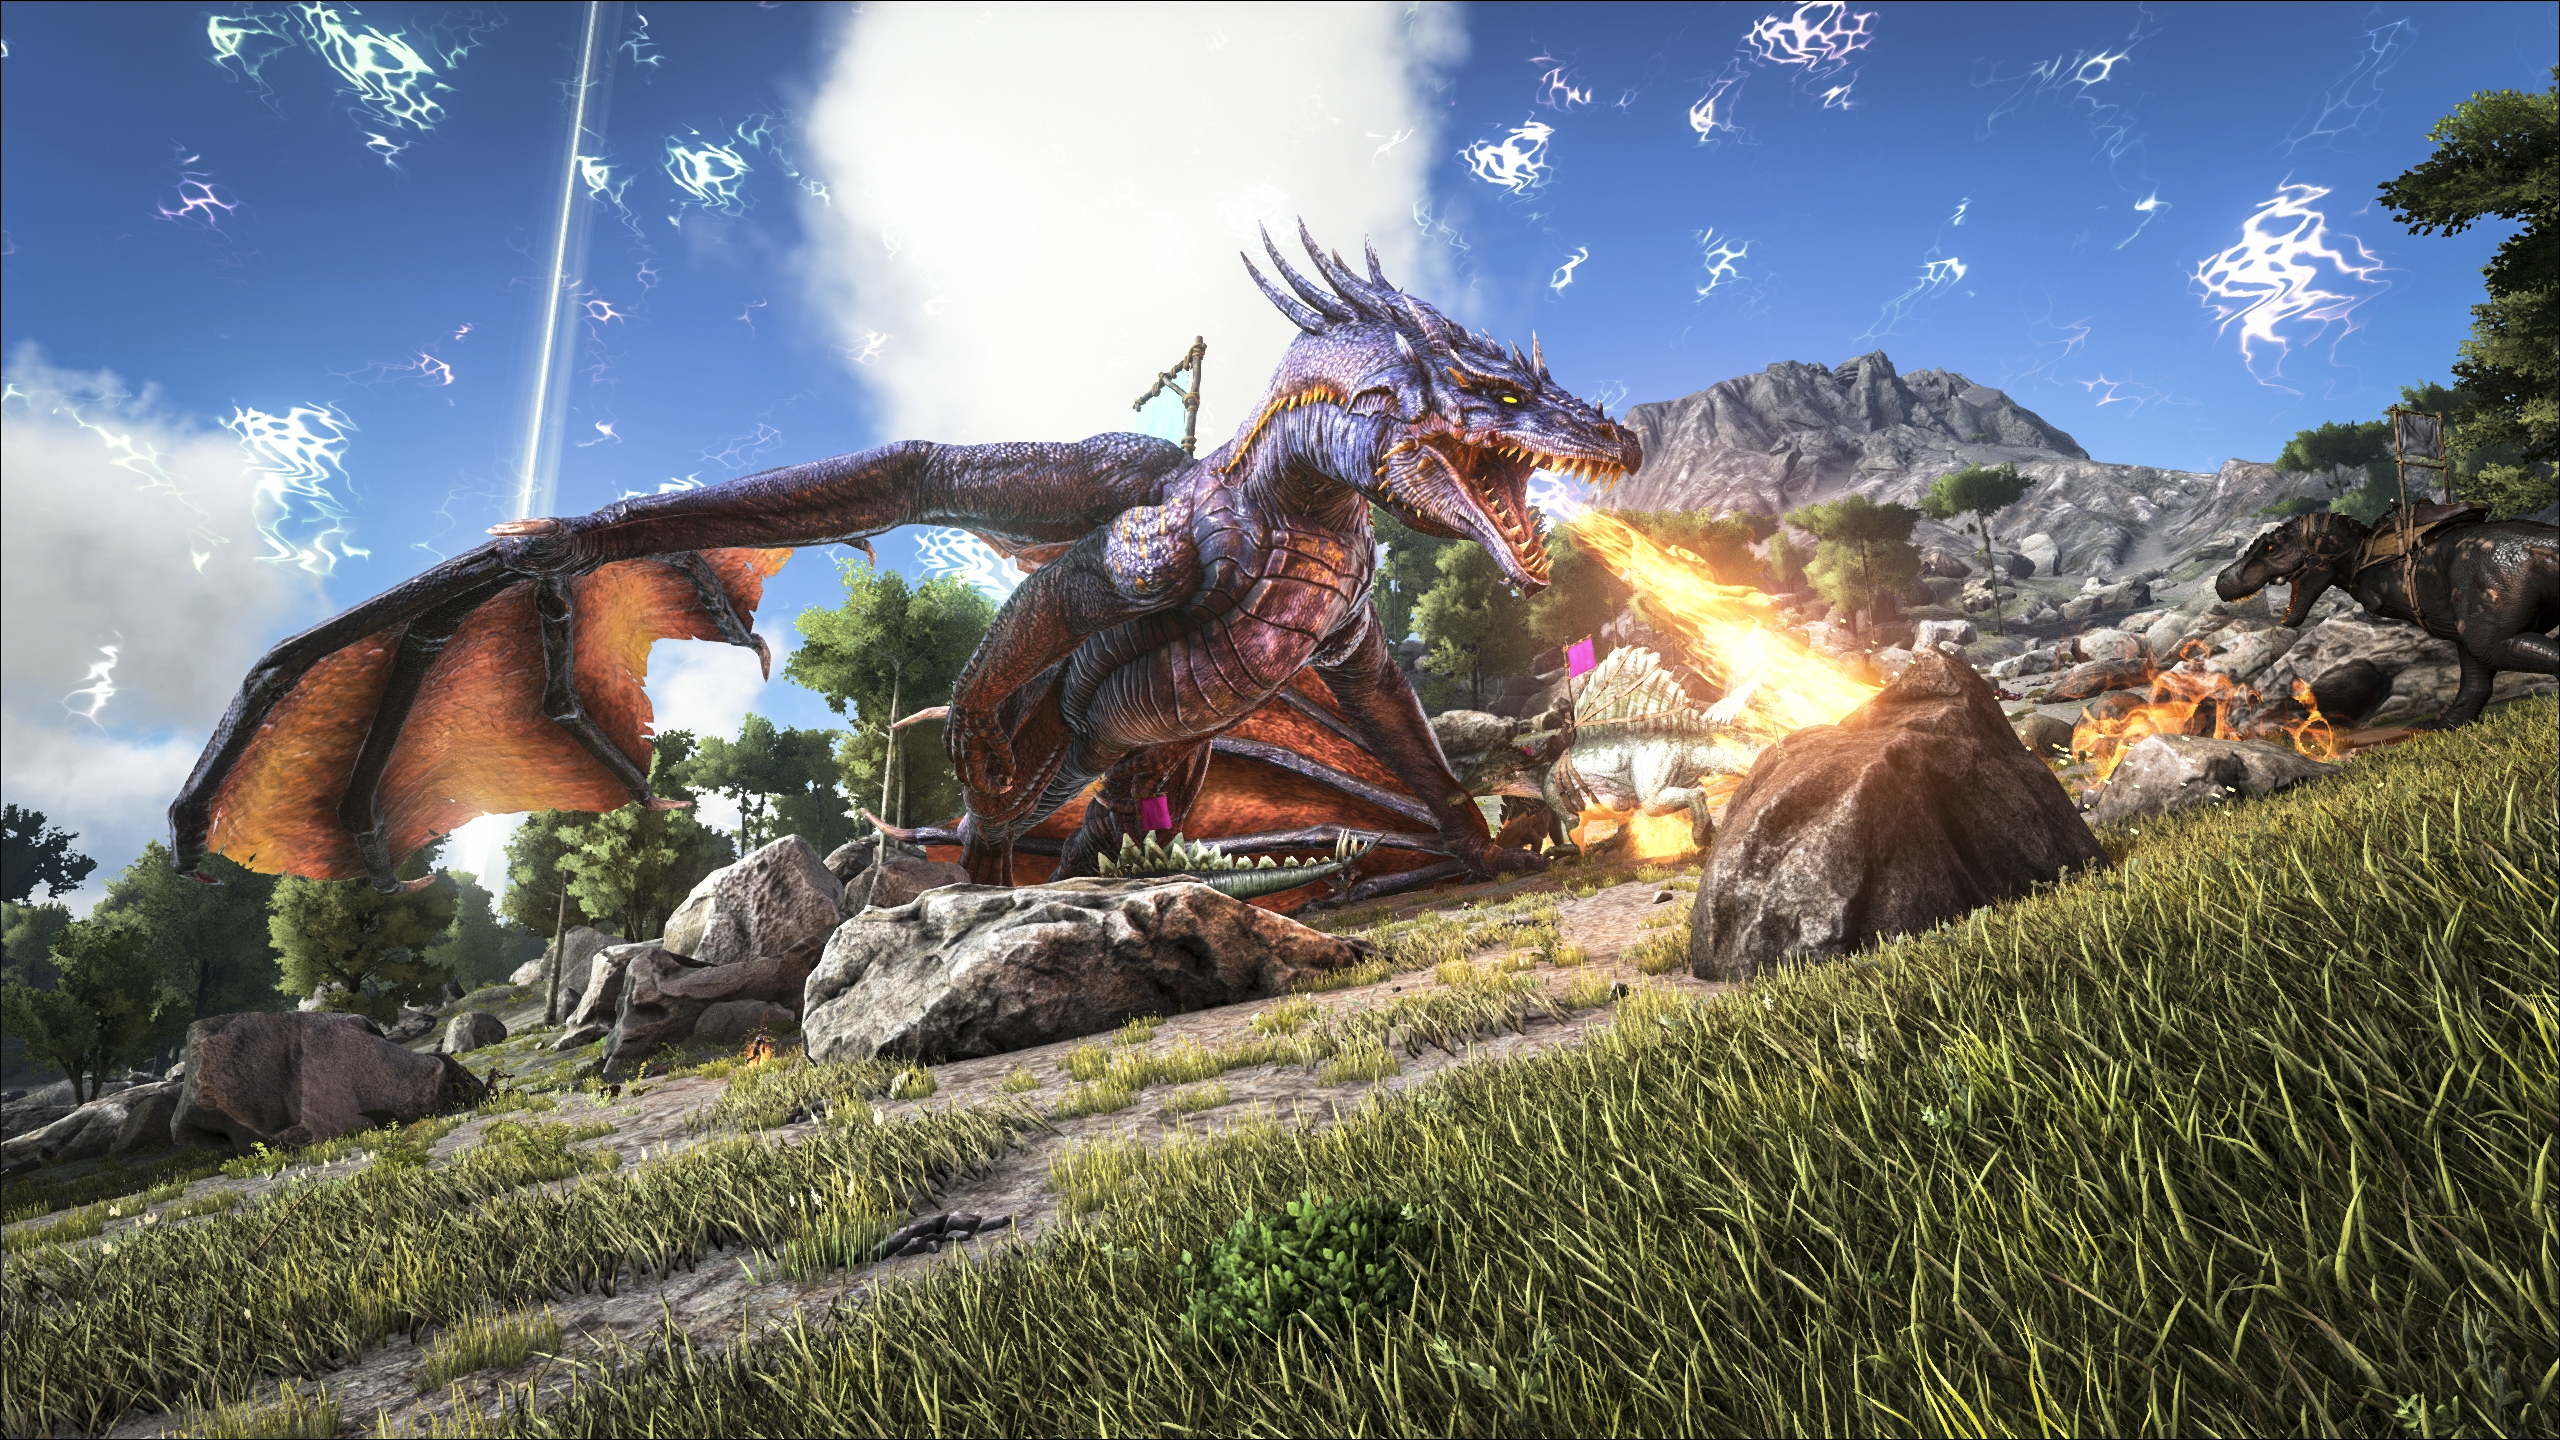 Ark isn't afraid to throw some seriously scary dinosaurs at players.